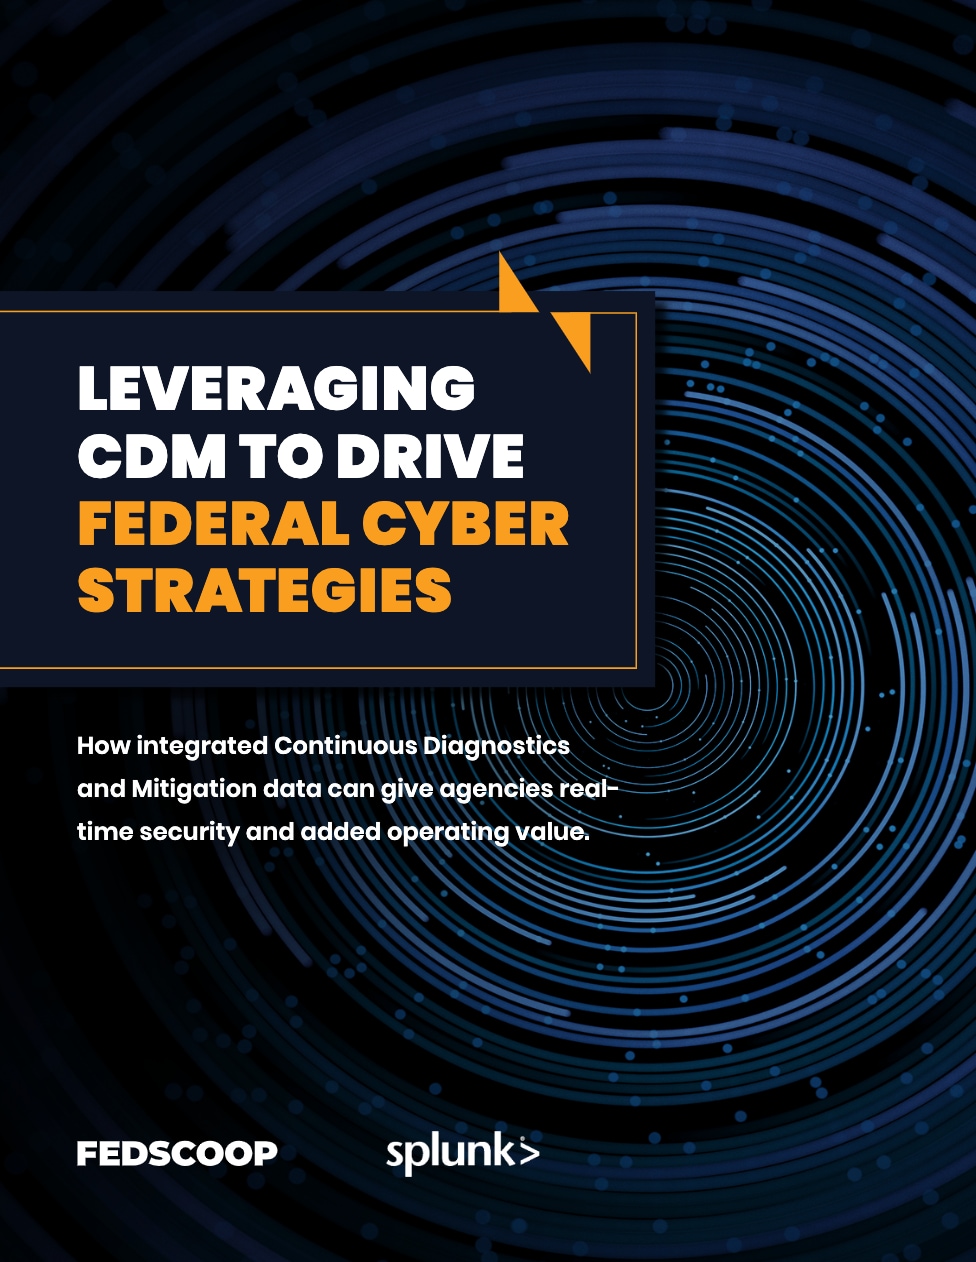 Leveraging CDM to Drive Federal Cyber Strategies